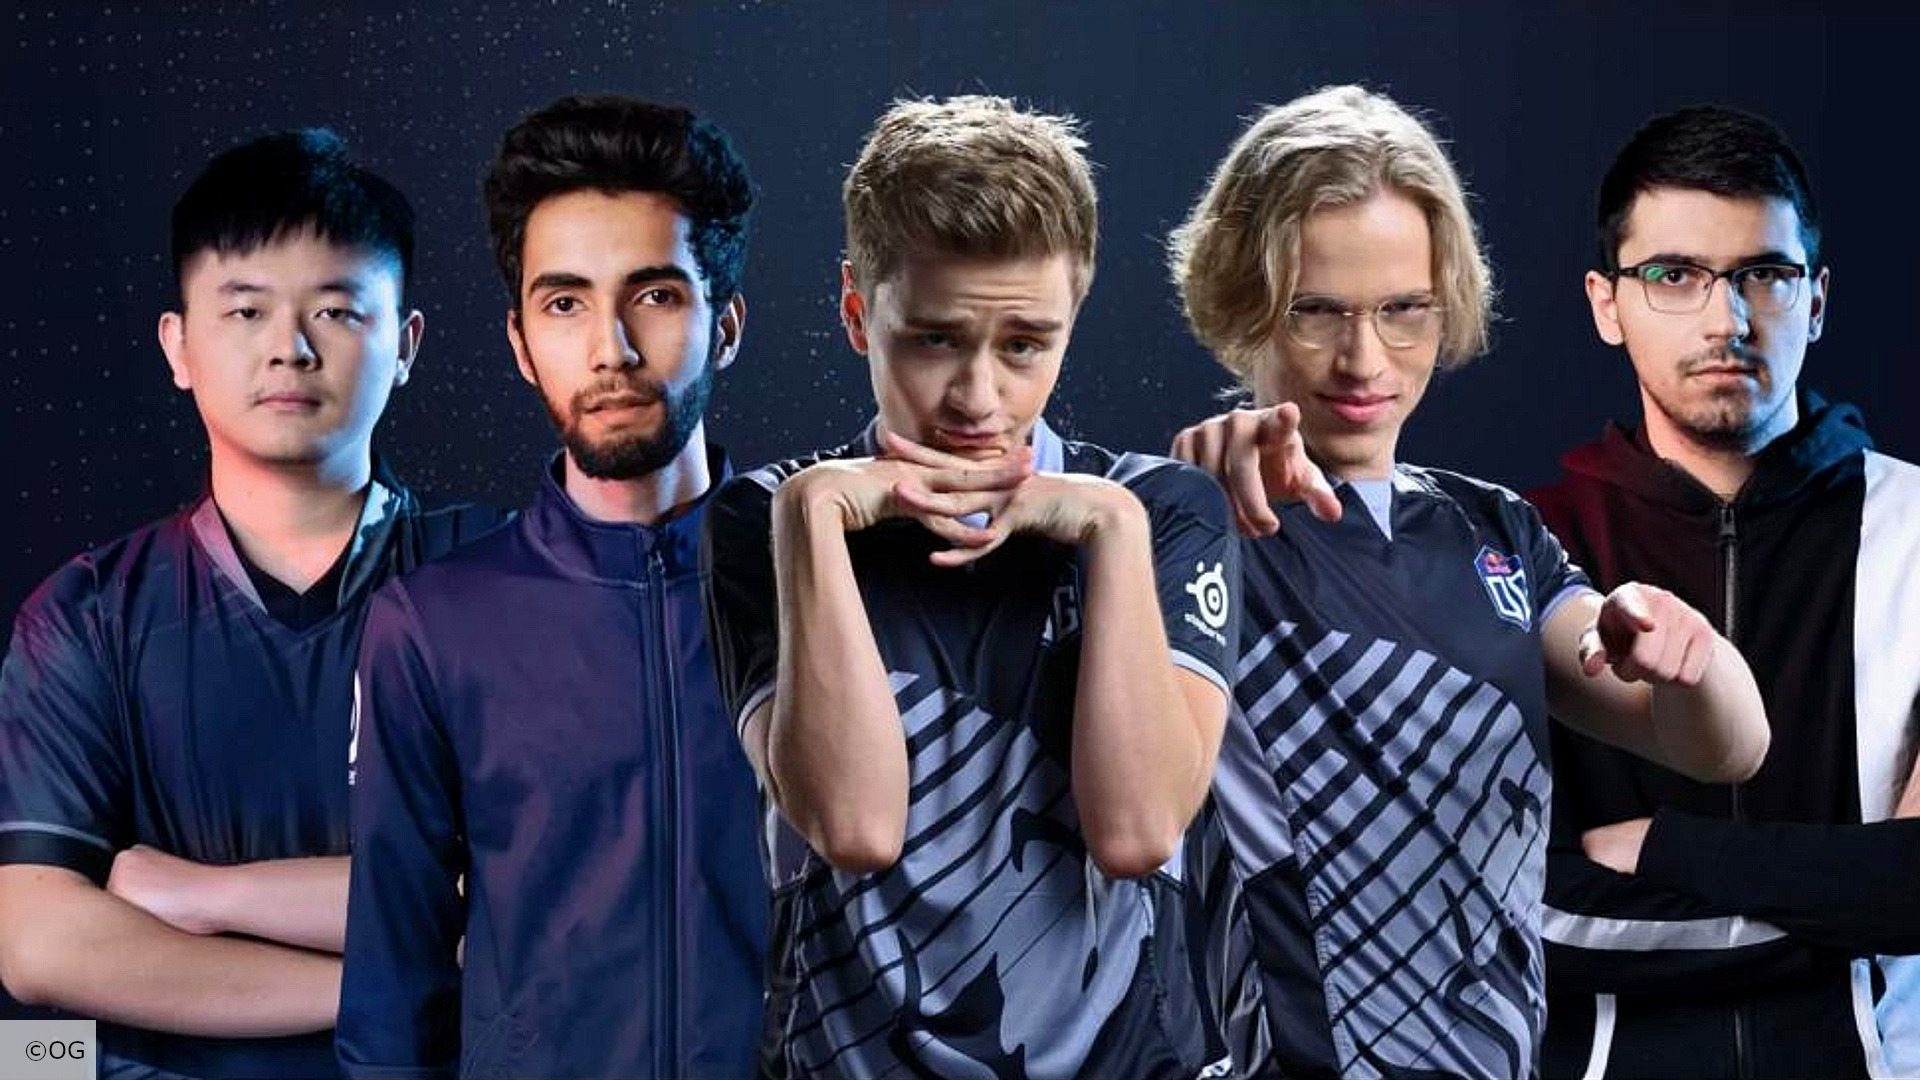 OG unveils its complete Dota 2 roster for 2020 | The Loadout